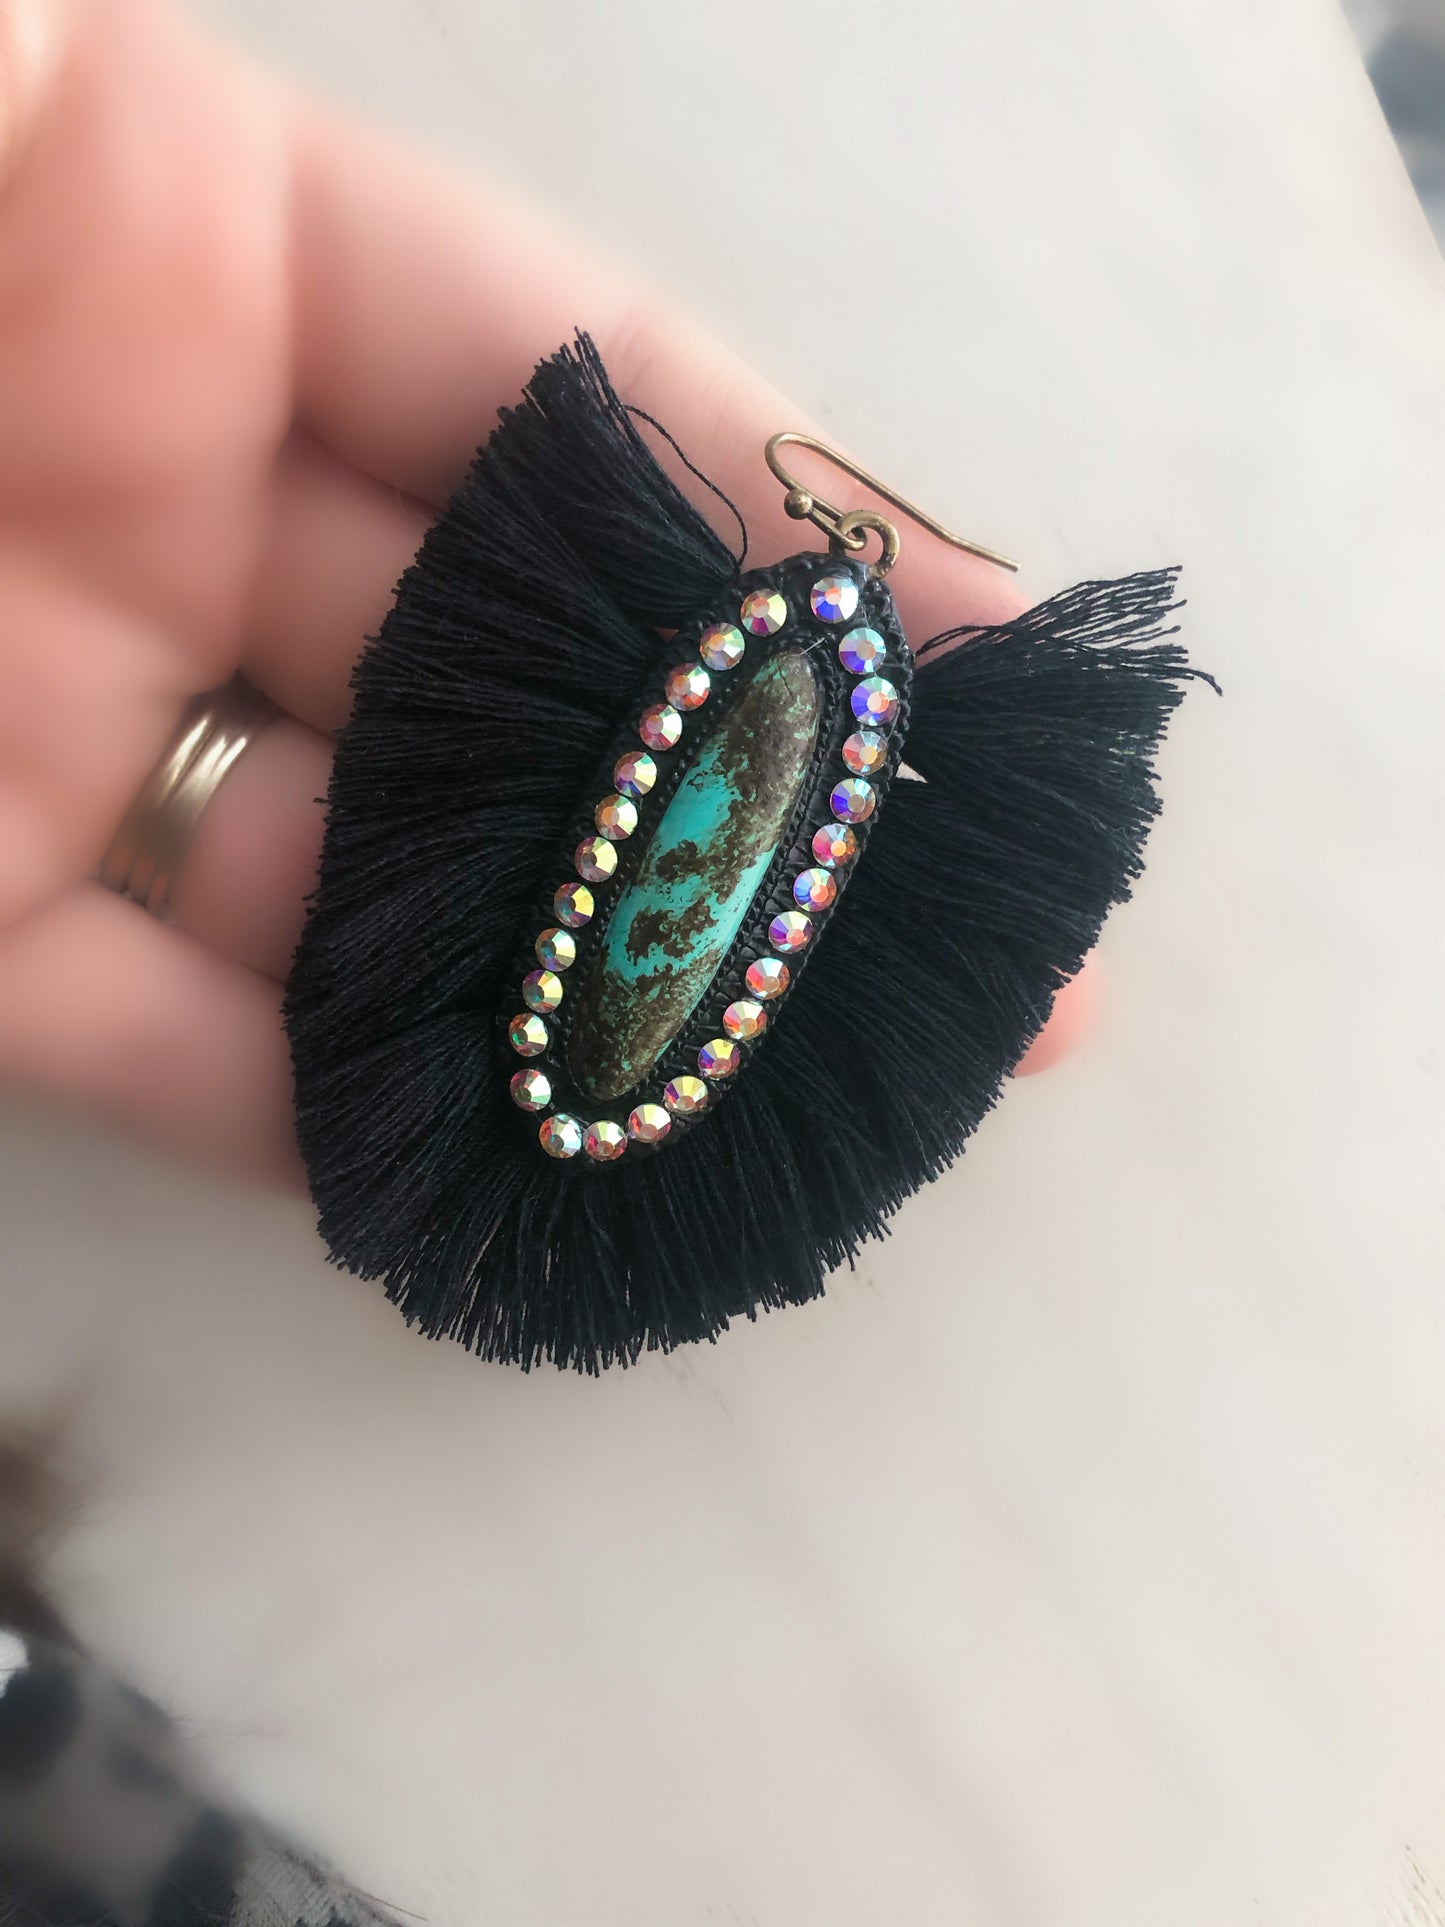 CASPER EARRINGS - TURQUOISE STONE WITH BLACK FRINGE AND AB CRYSTALS